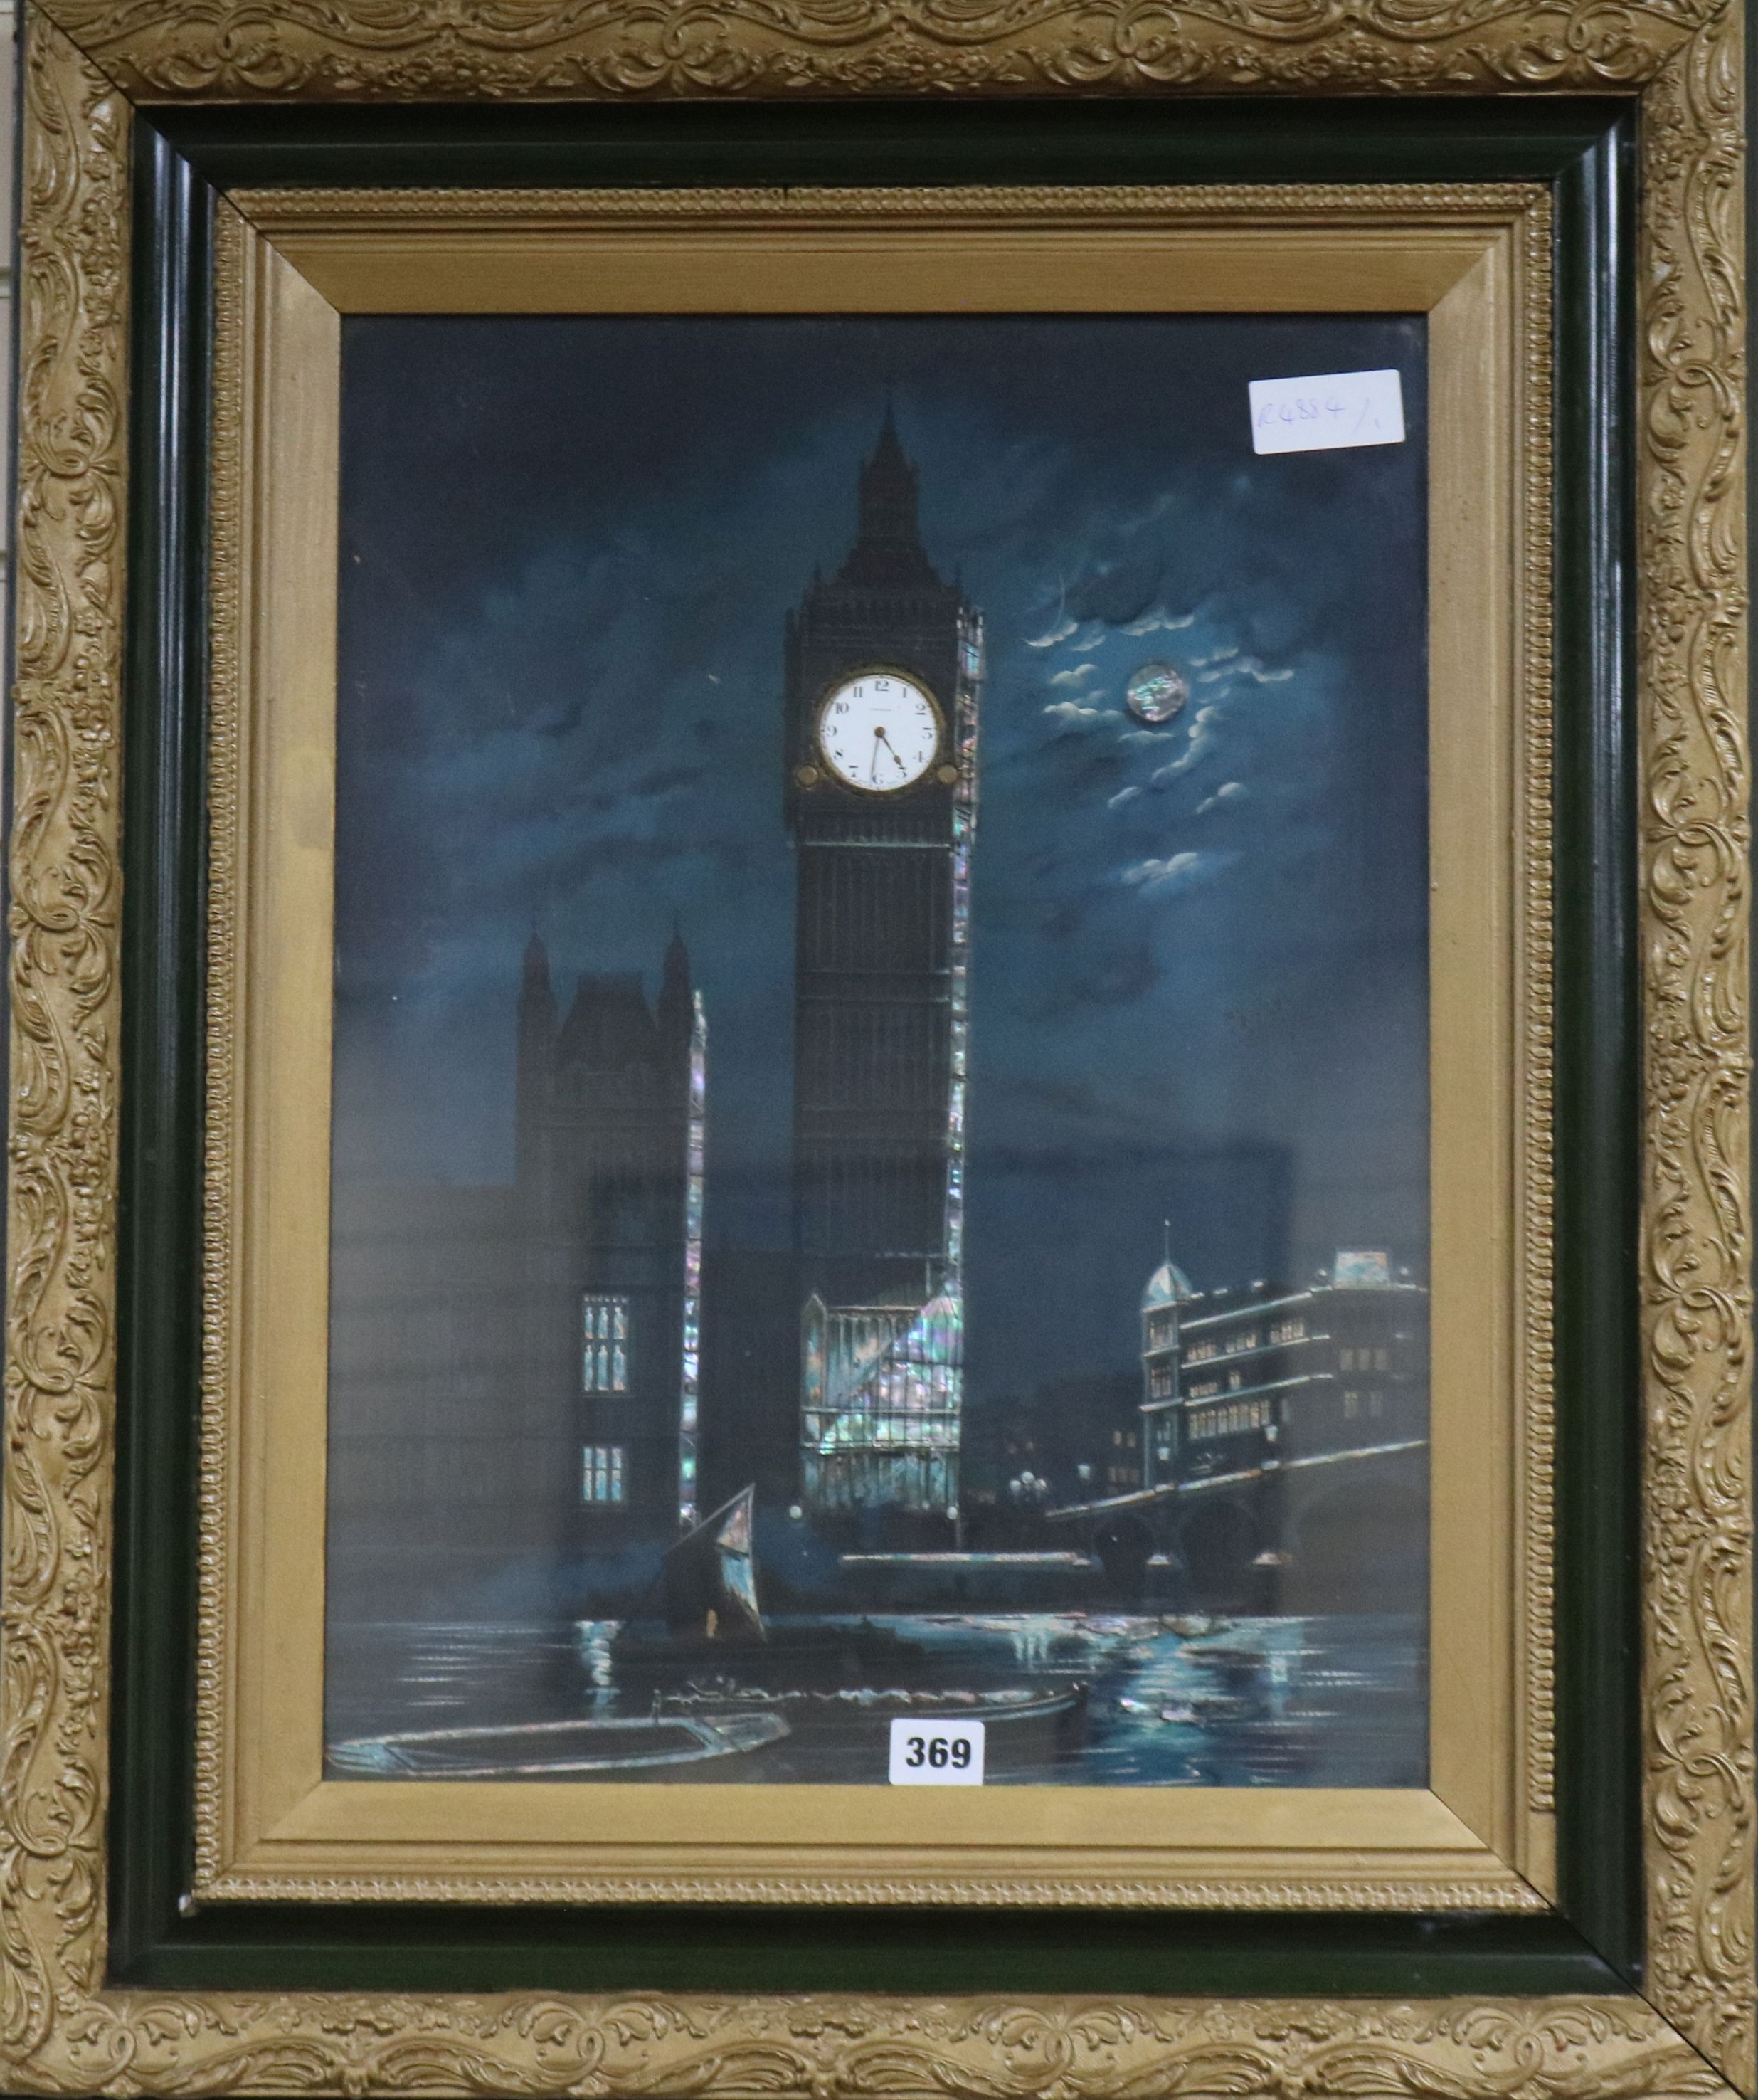 A timepiece picture of Big Ben with mother of pearl overlay and a clock face inlaid to the tower, 50